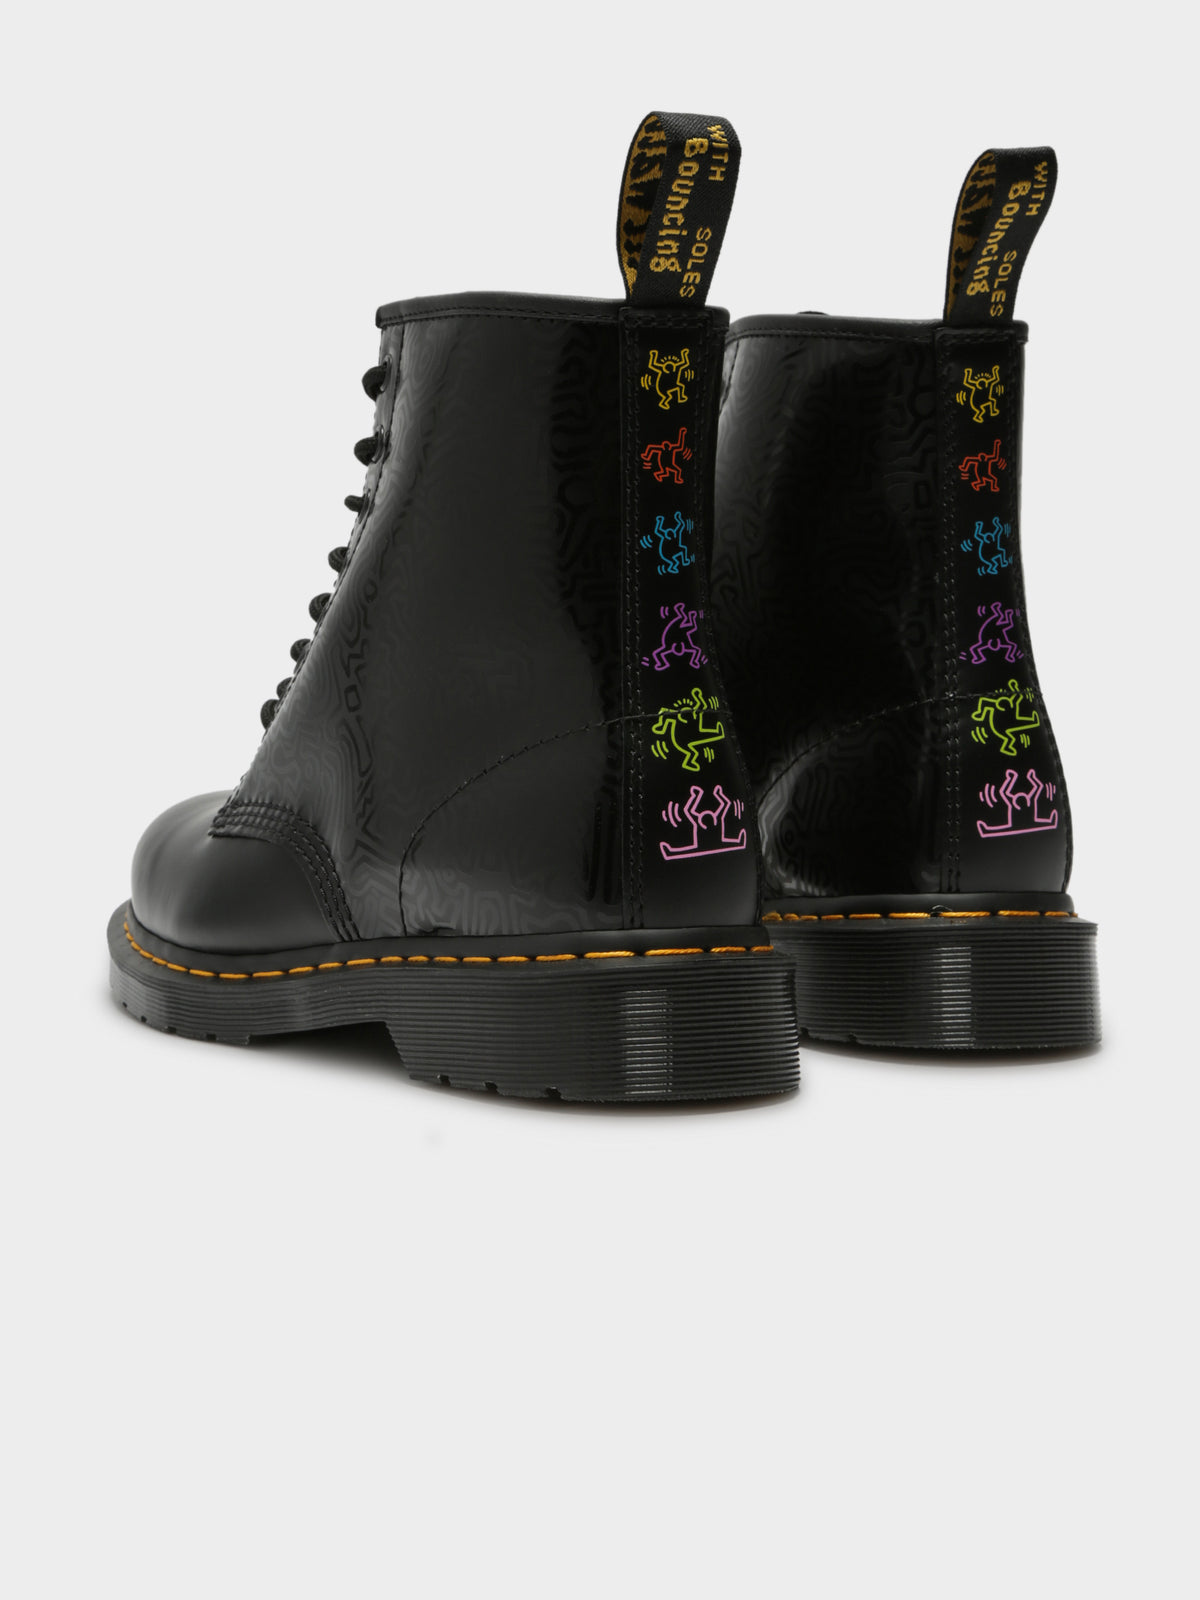 Unisex 1460 Keith Haring Boots in Black